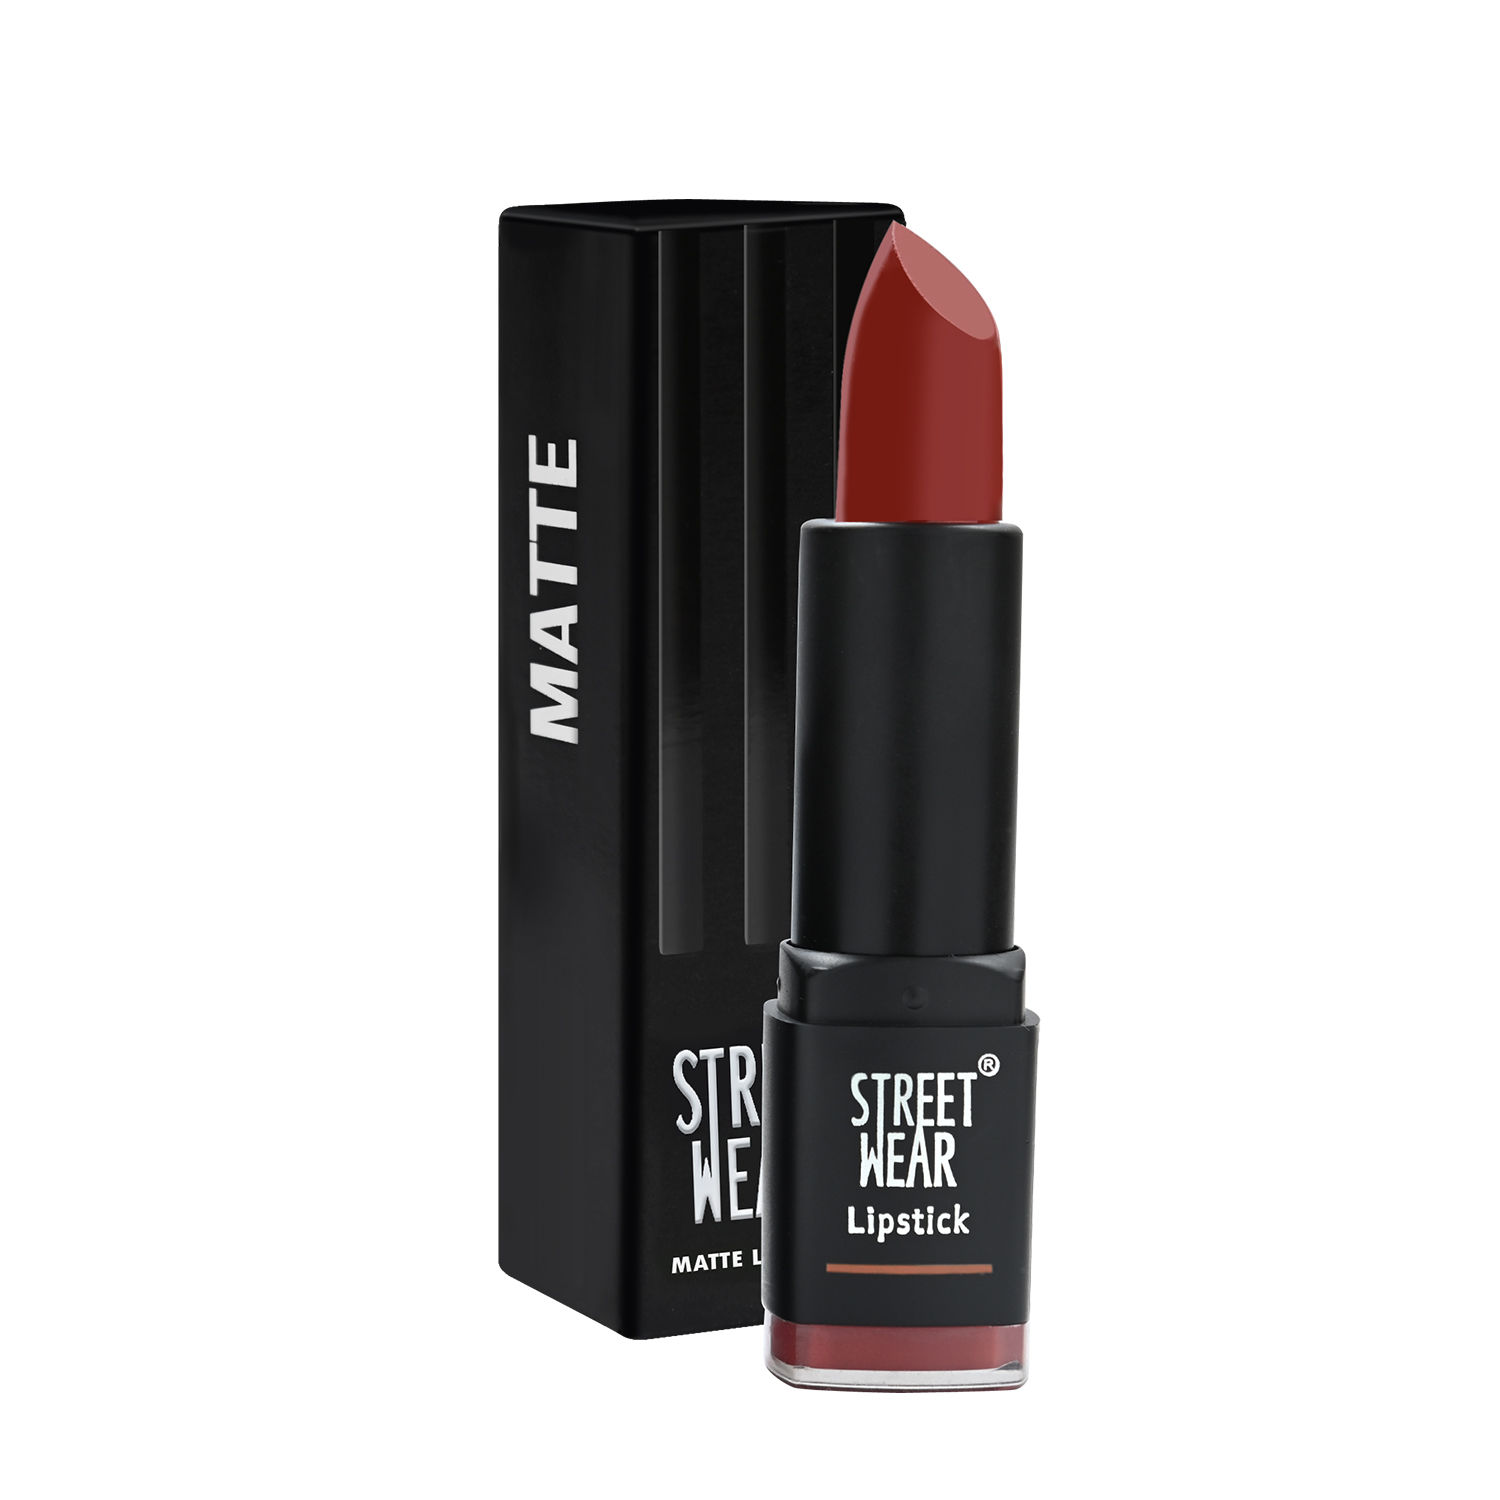 Buy STREET WEAR® Matte Lipstick -BRICK BROWN (Brown) - 4.2 gms -Longwear, Velvety texture, Fade-resistant, High Color payoff, Lightweight Matte Lipstick, Plant-based Canuuba wax, Paraben-free - Purplle